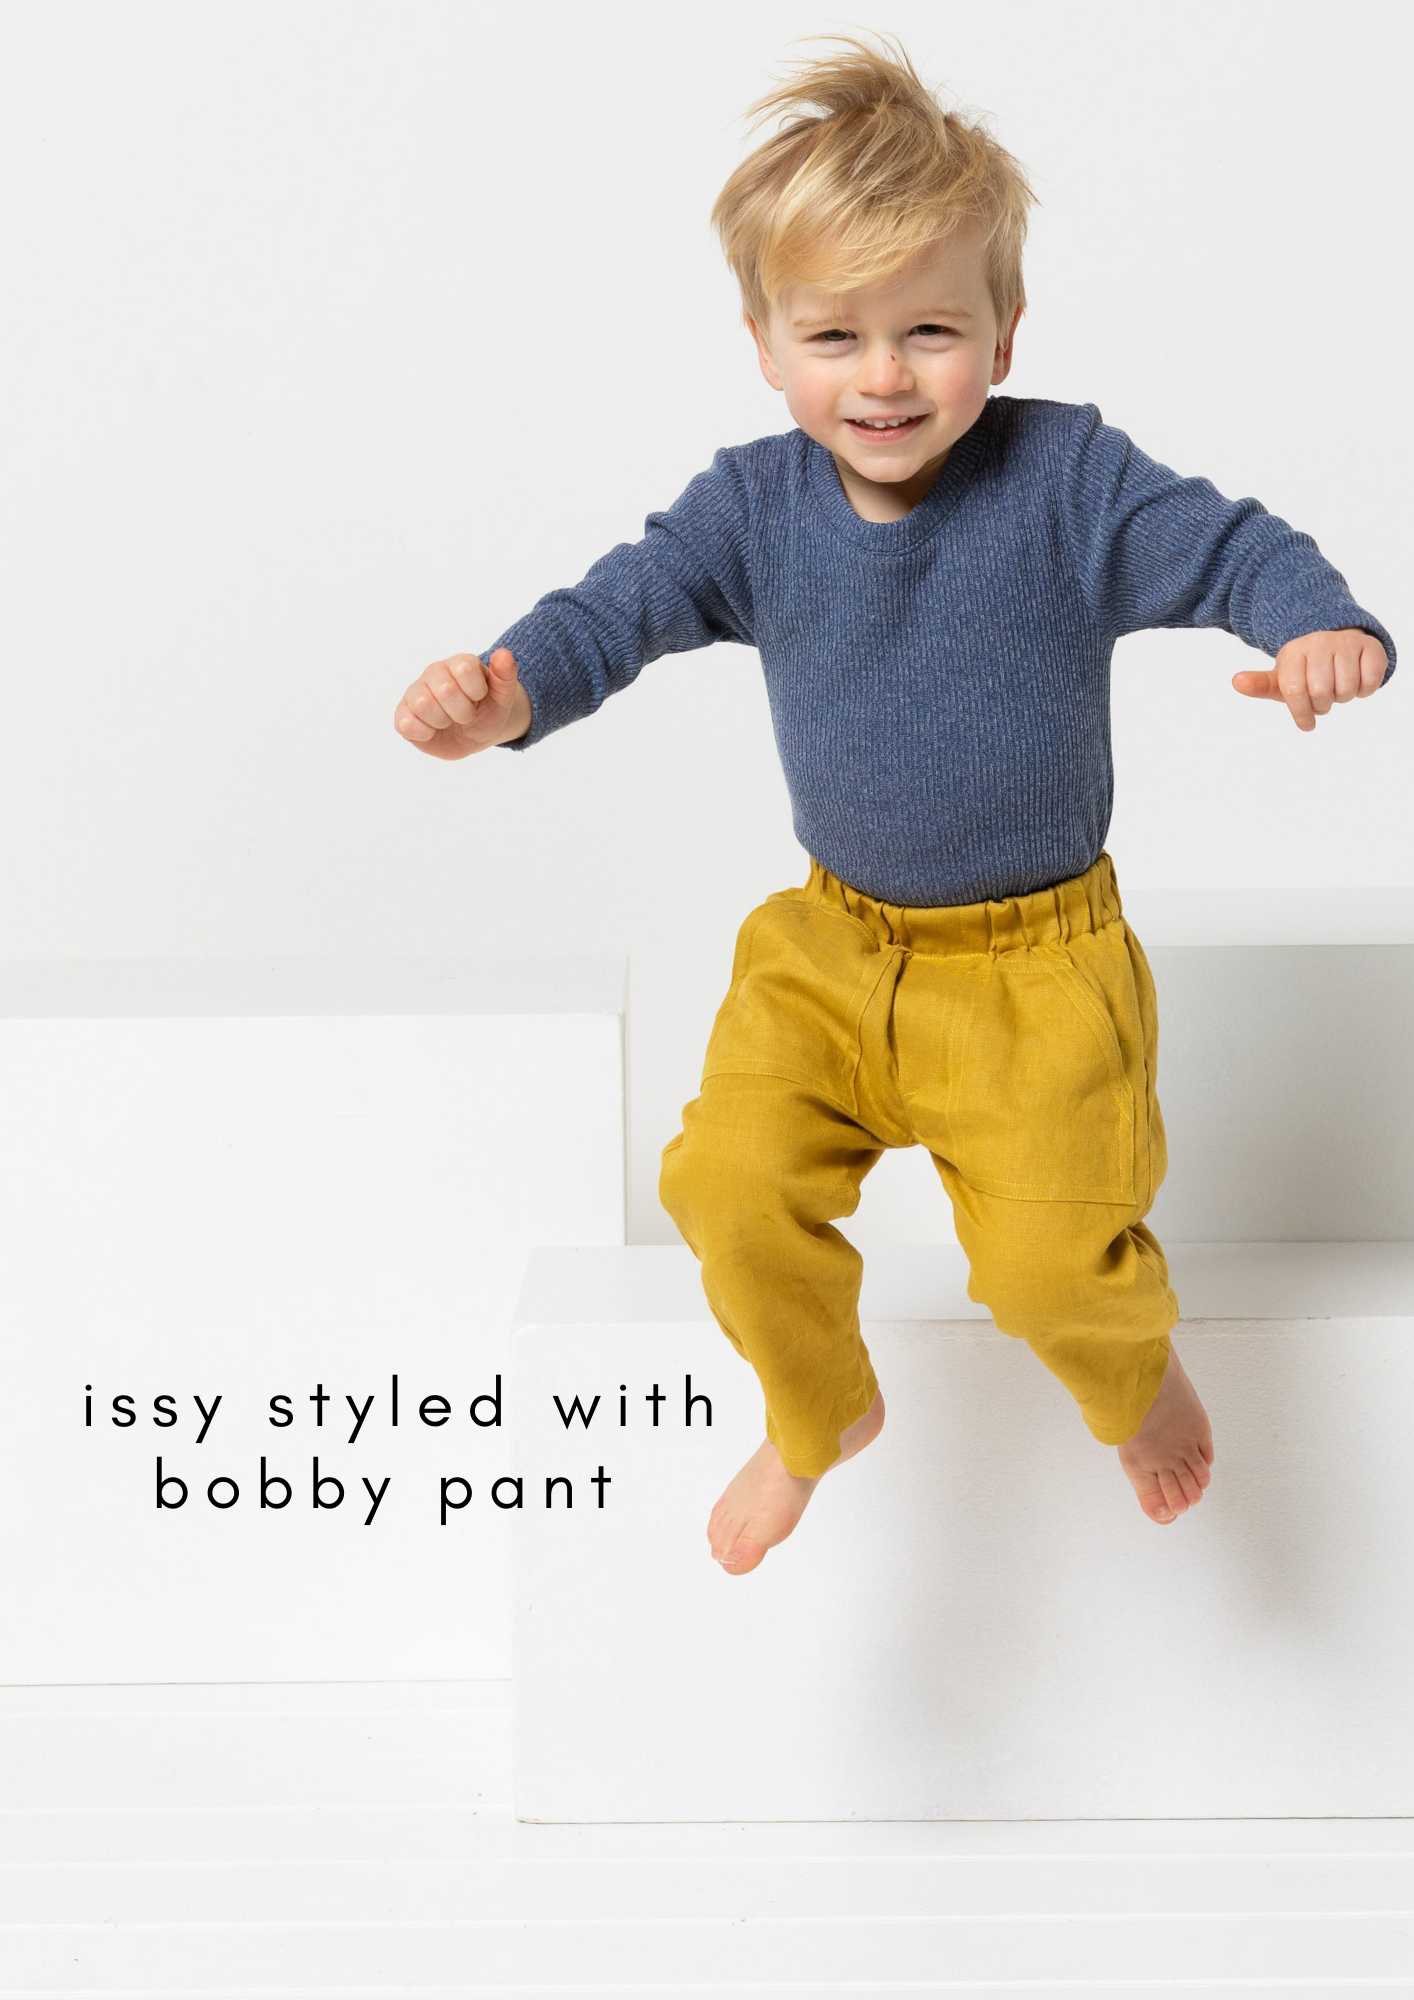 Style Arc's August Bonus Pattern: Issy Knit Dress / Top - available to purchase in Kids sizing 02-08 or Teens sizing -8-16